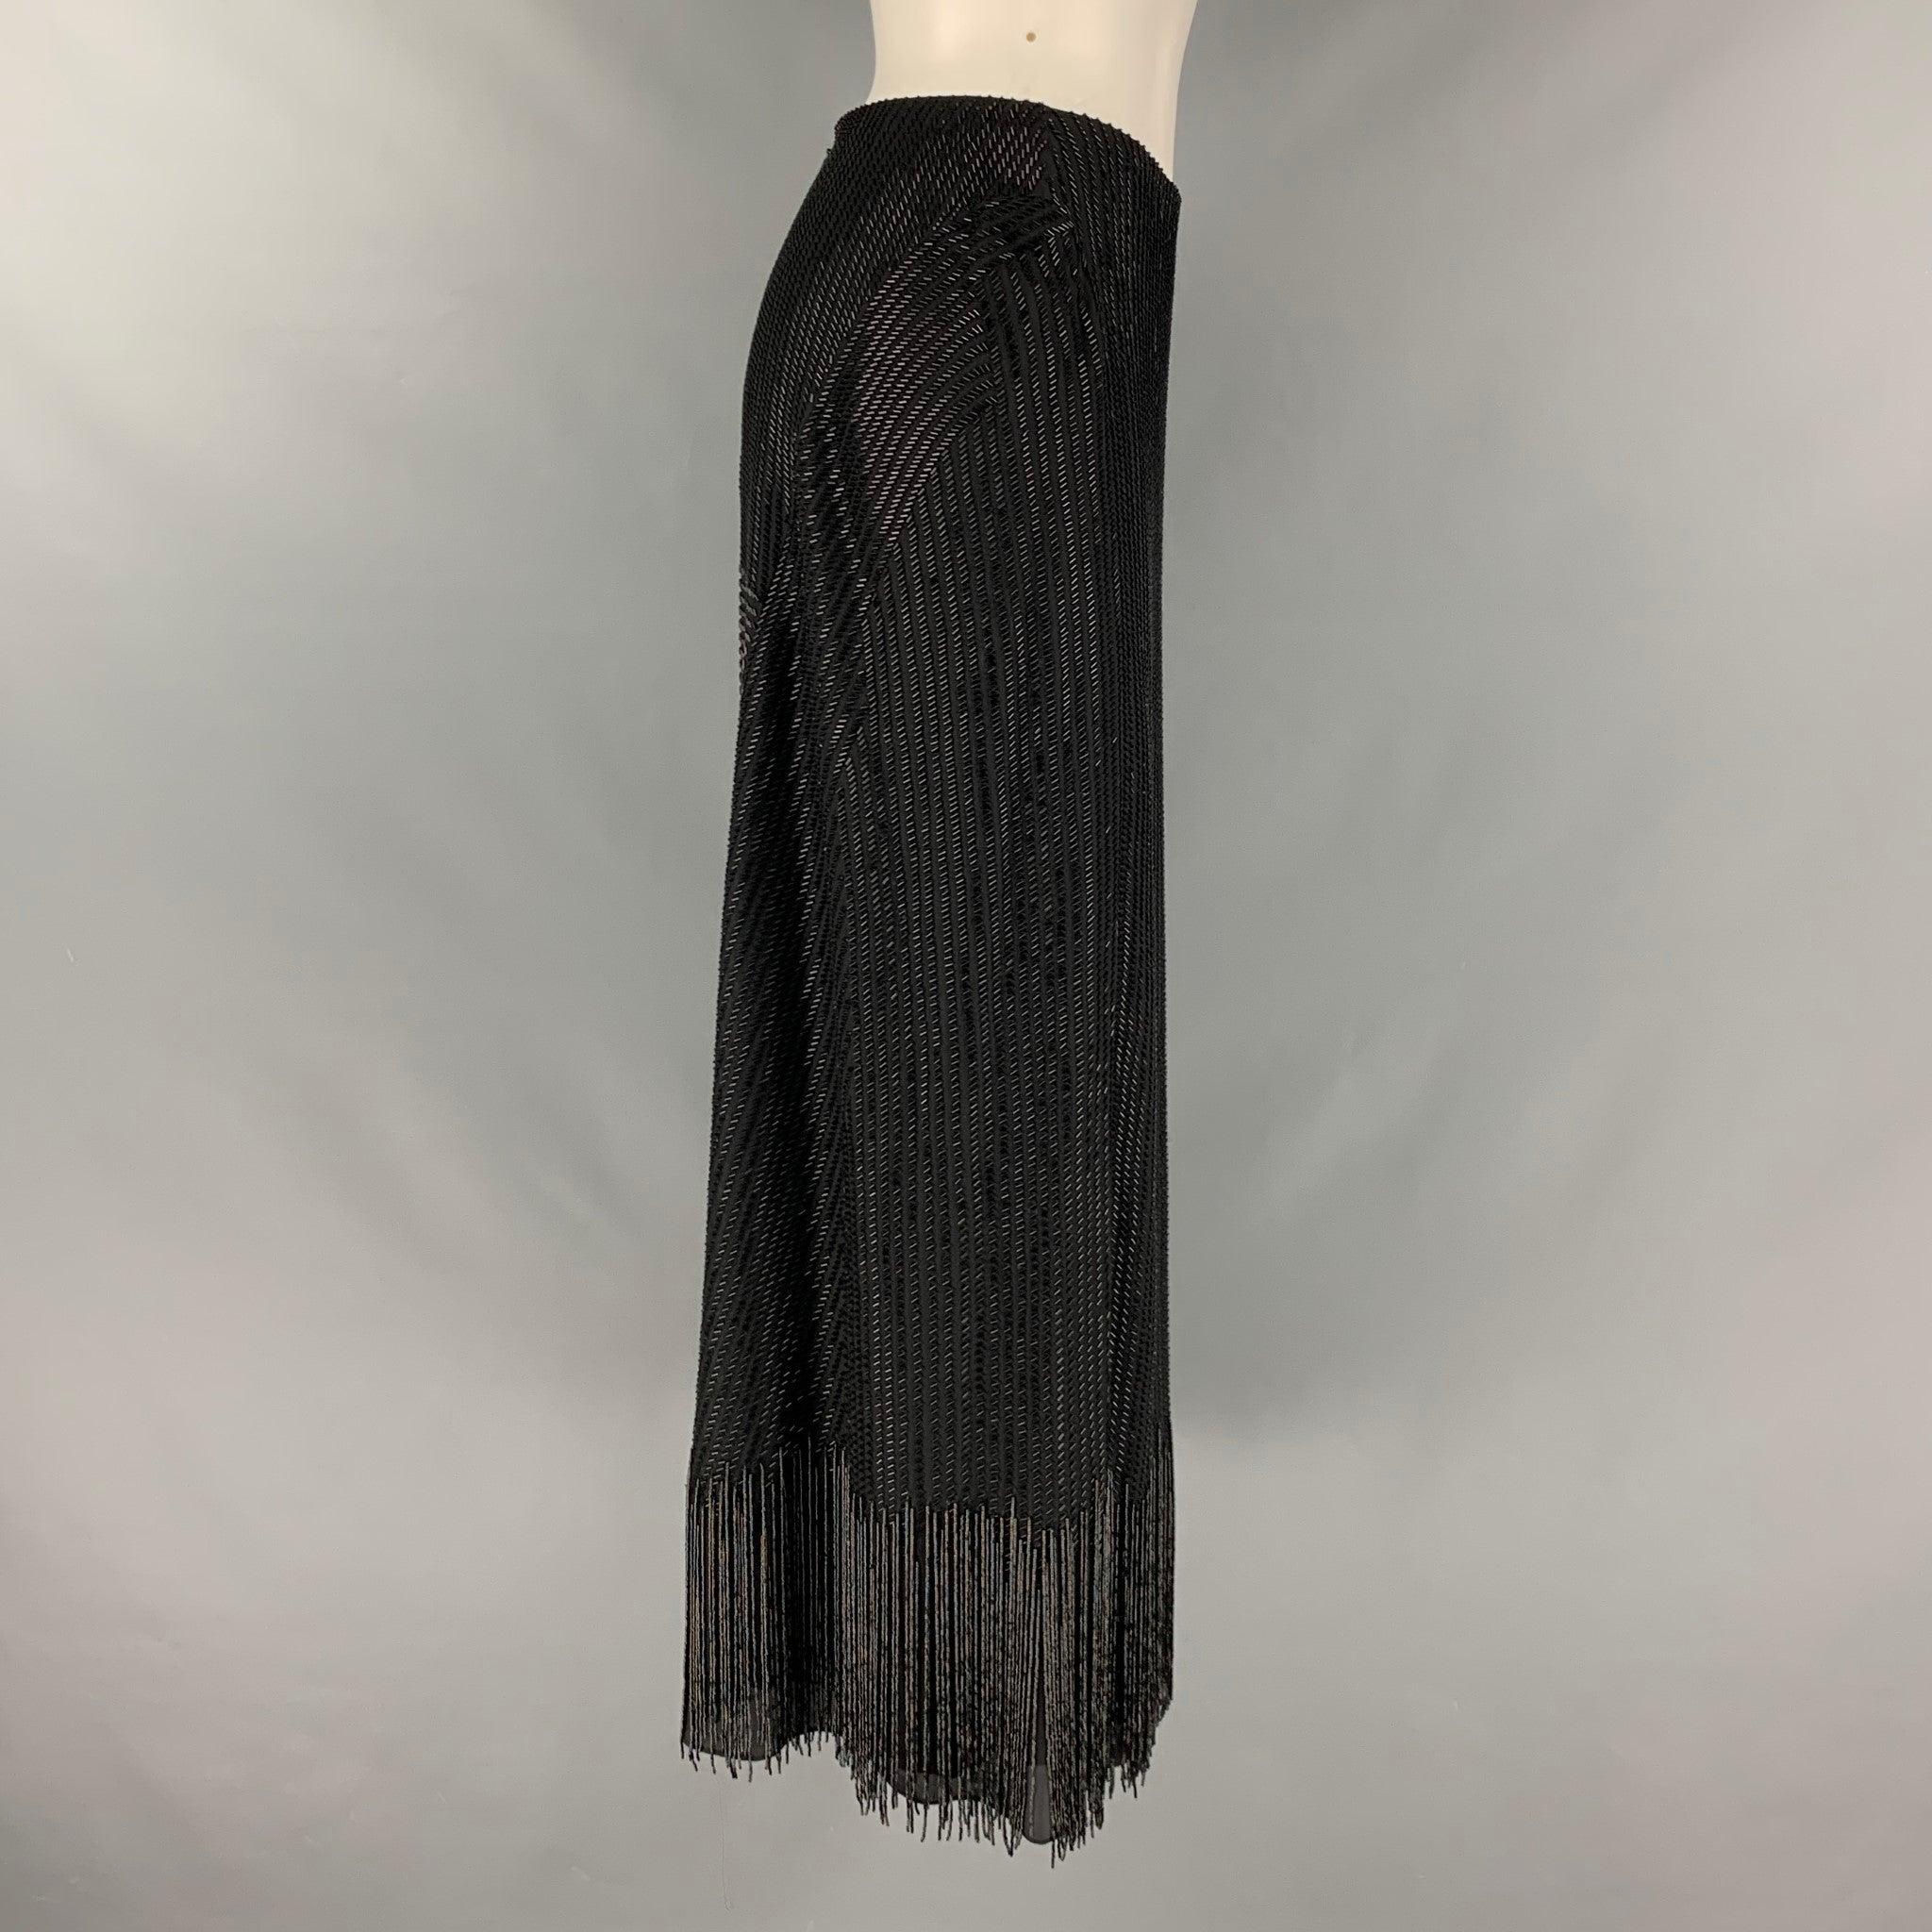 RALPH LAUREN COLLECTION dress skirt comes in a black beaded silk woven material featuring fringe details, and a center back zip up closure. Made in USA.Excellent Pre- Owned Condition. 

Marked:   6 

Measurements: 
  Waist: 29 inHip: 38 inches